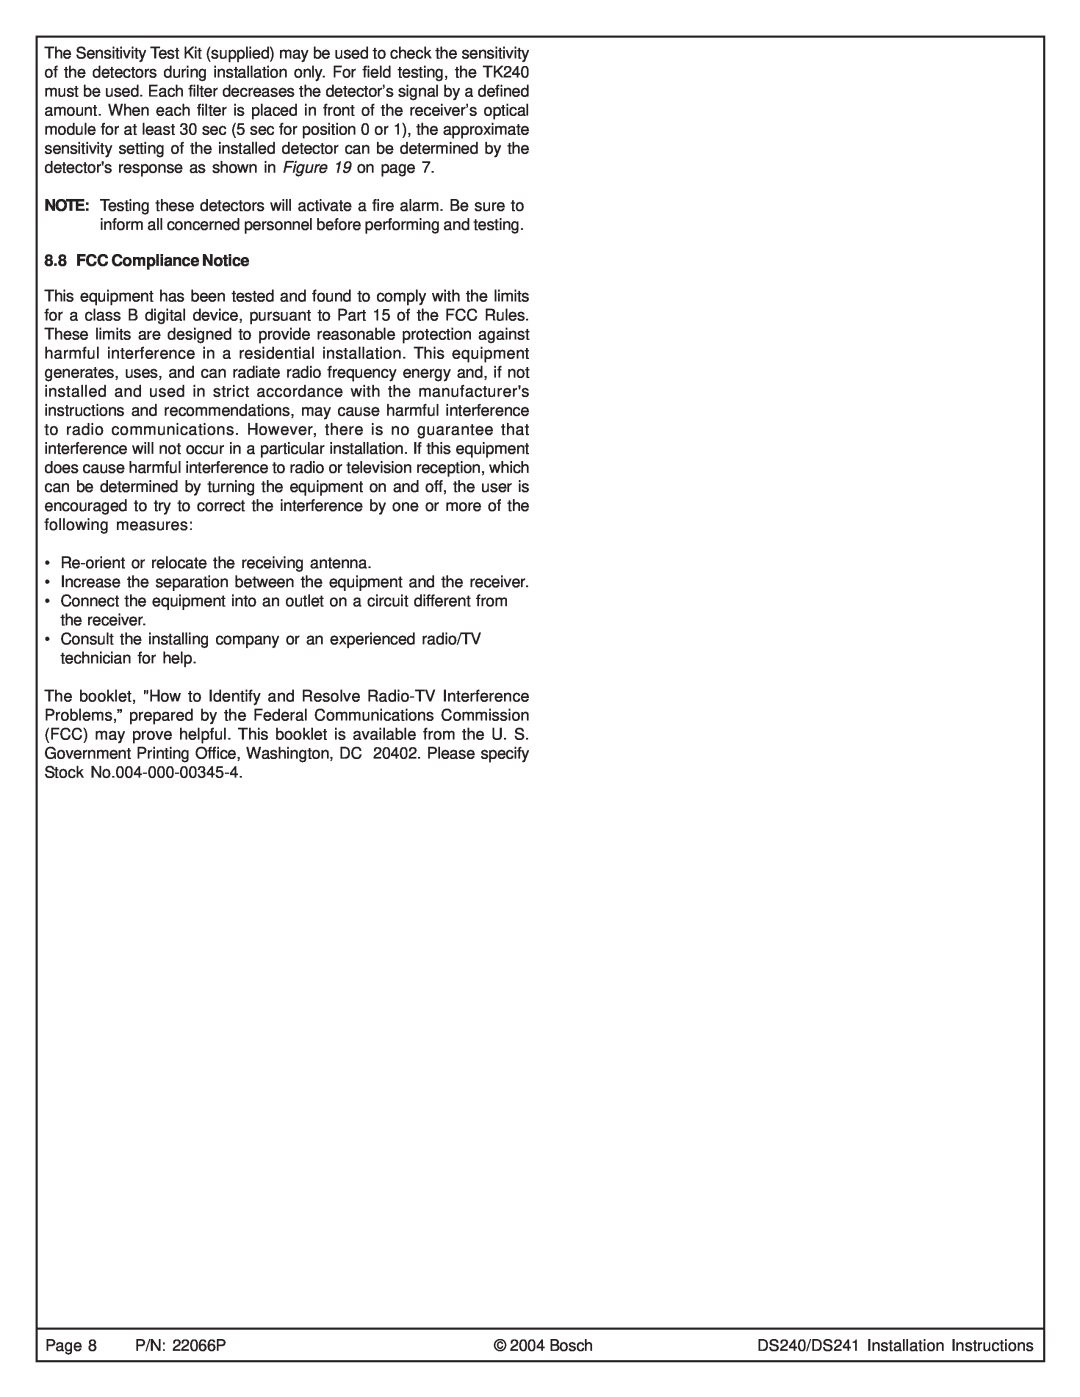 Bosch Power Tools DS241, DS240 specifications FCC Compliance Notice 